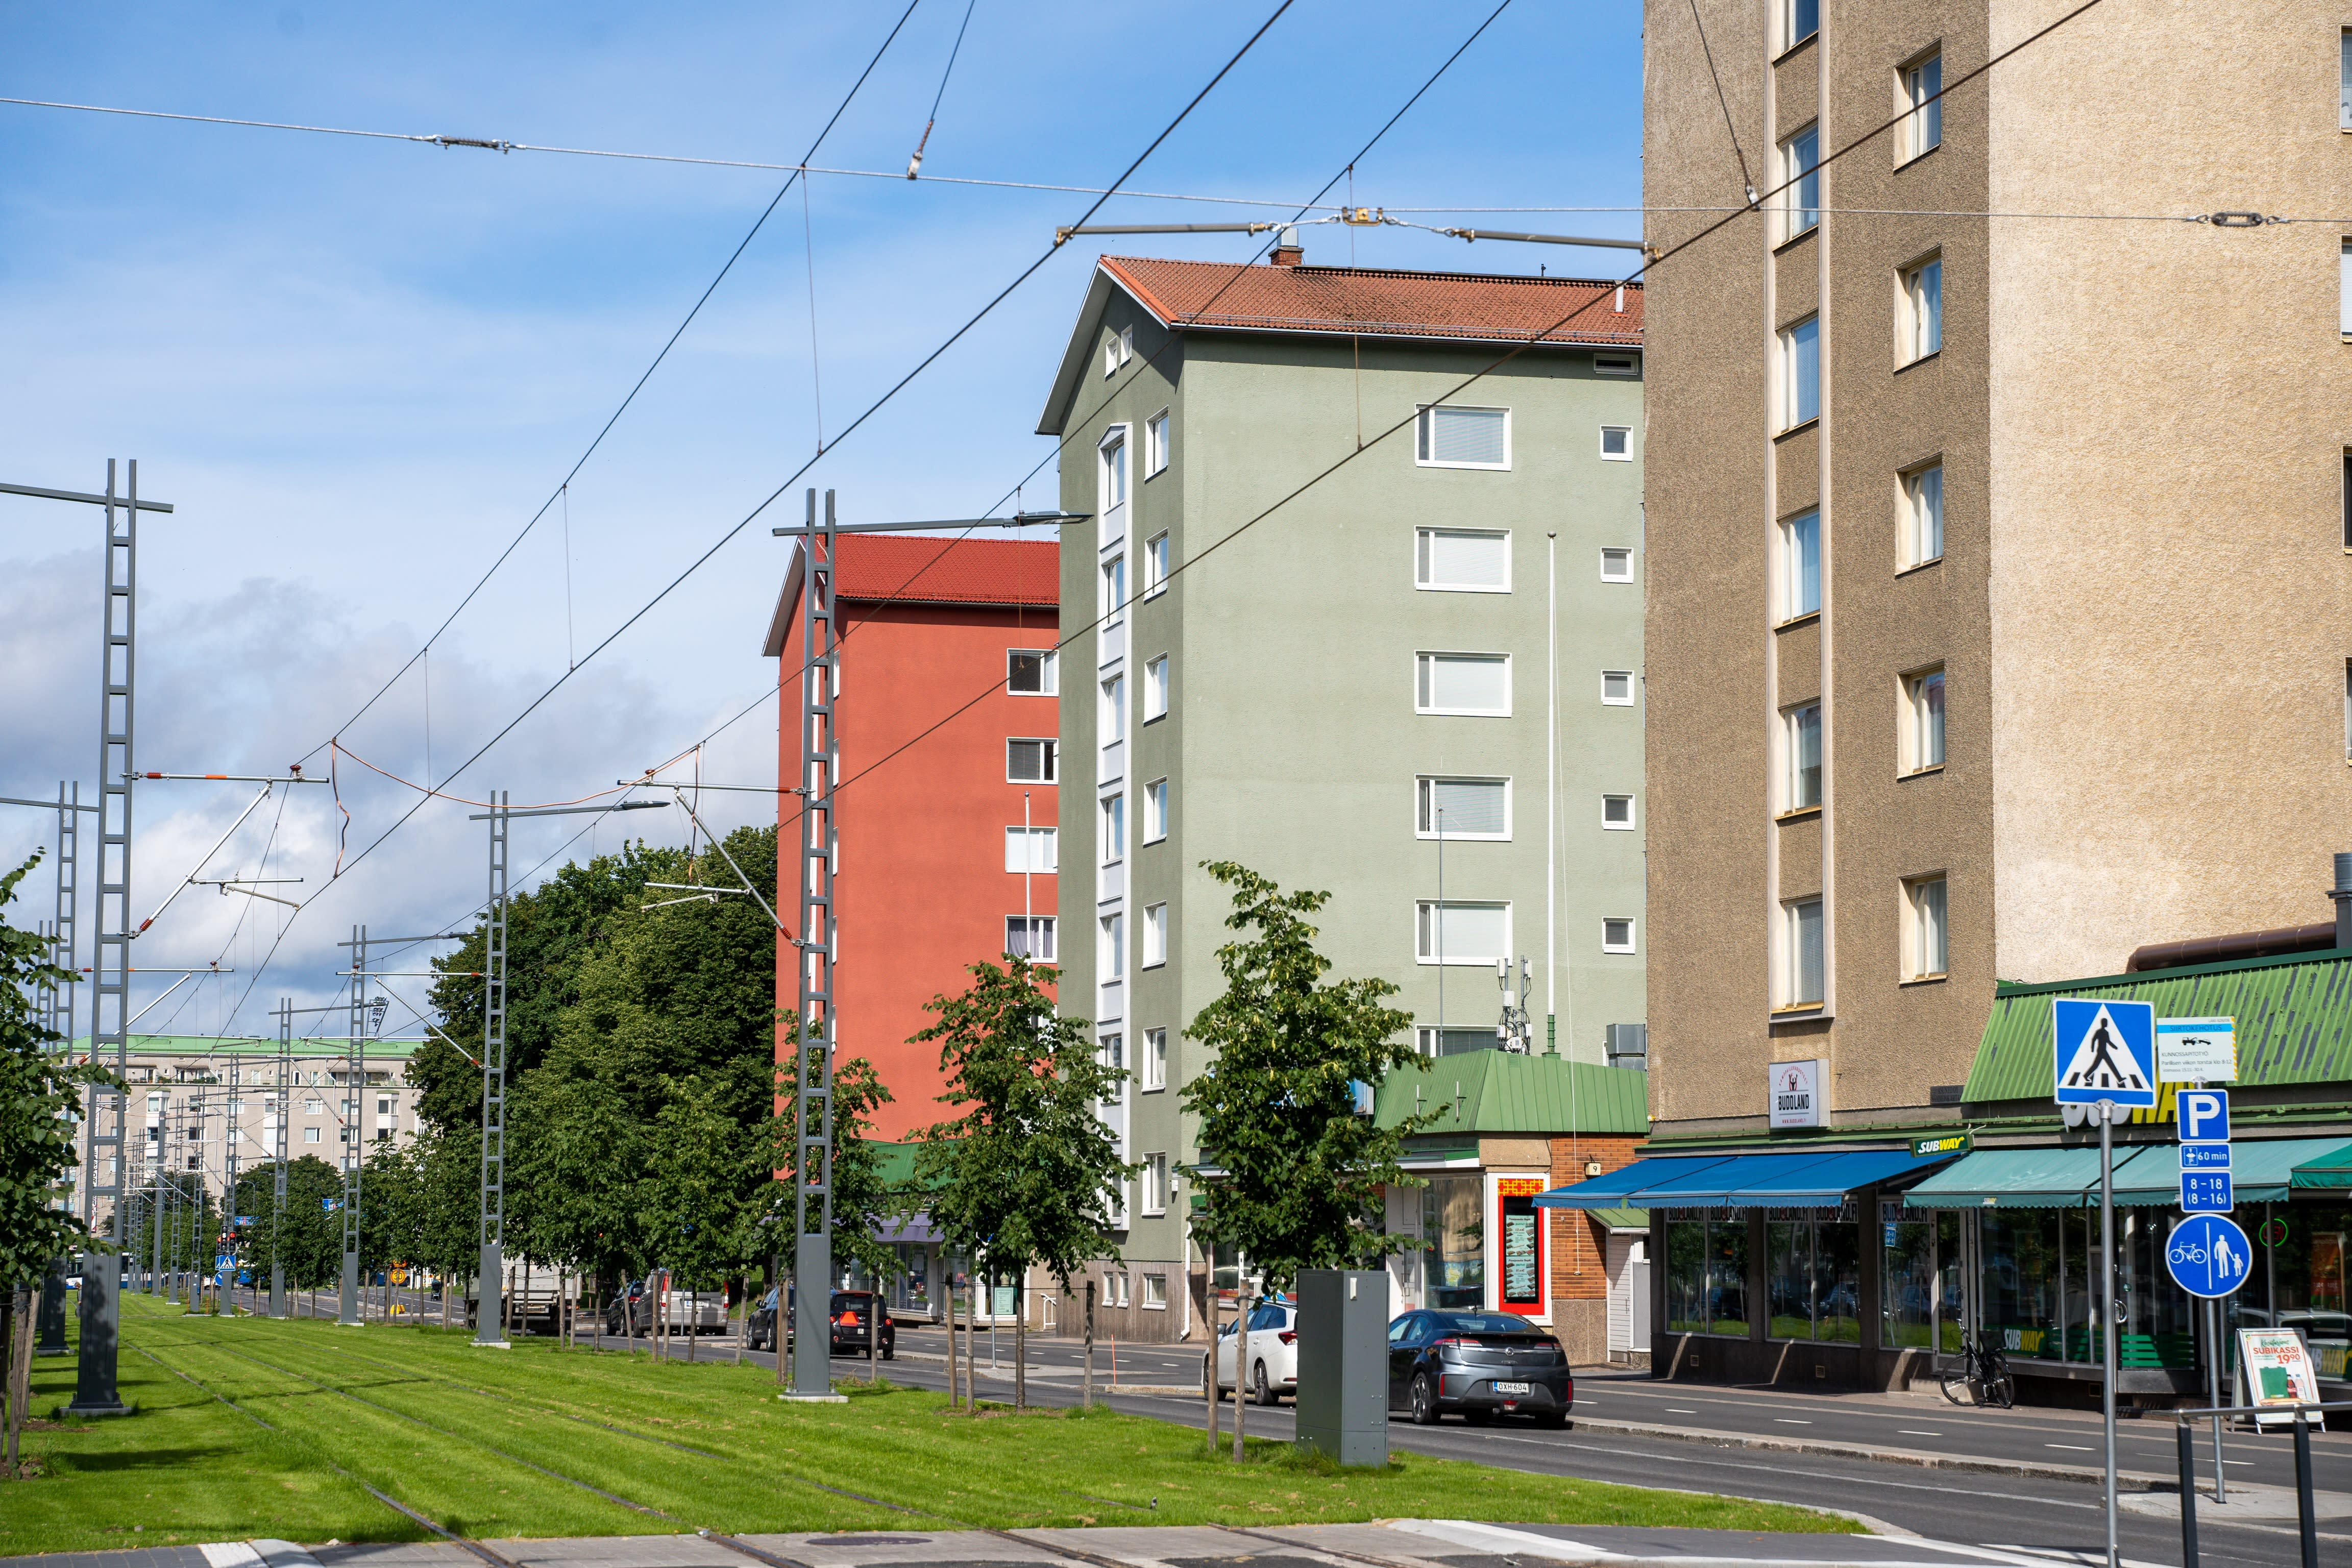 In Finnish cities, housing price growth is slowing down